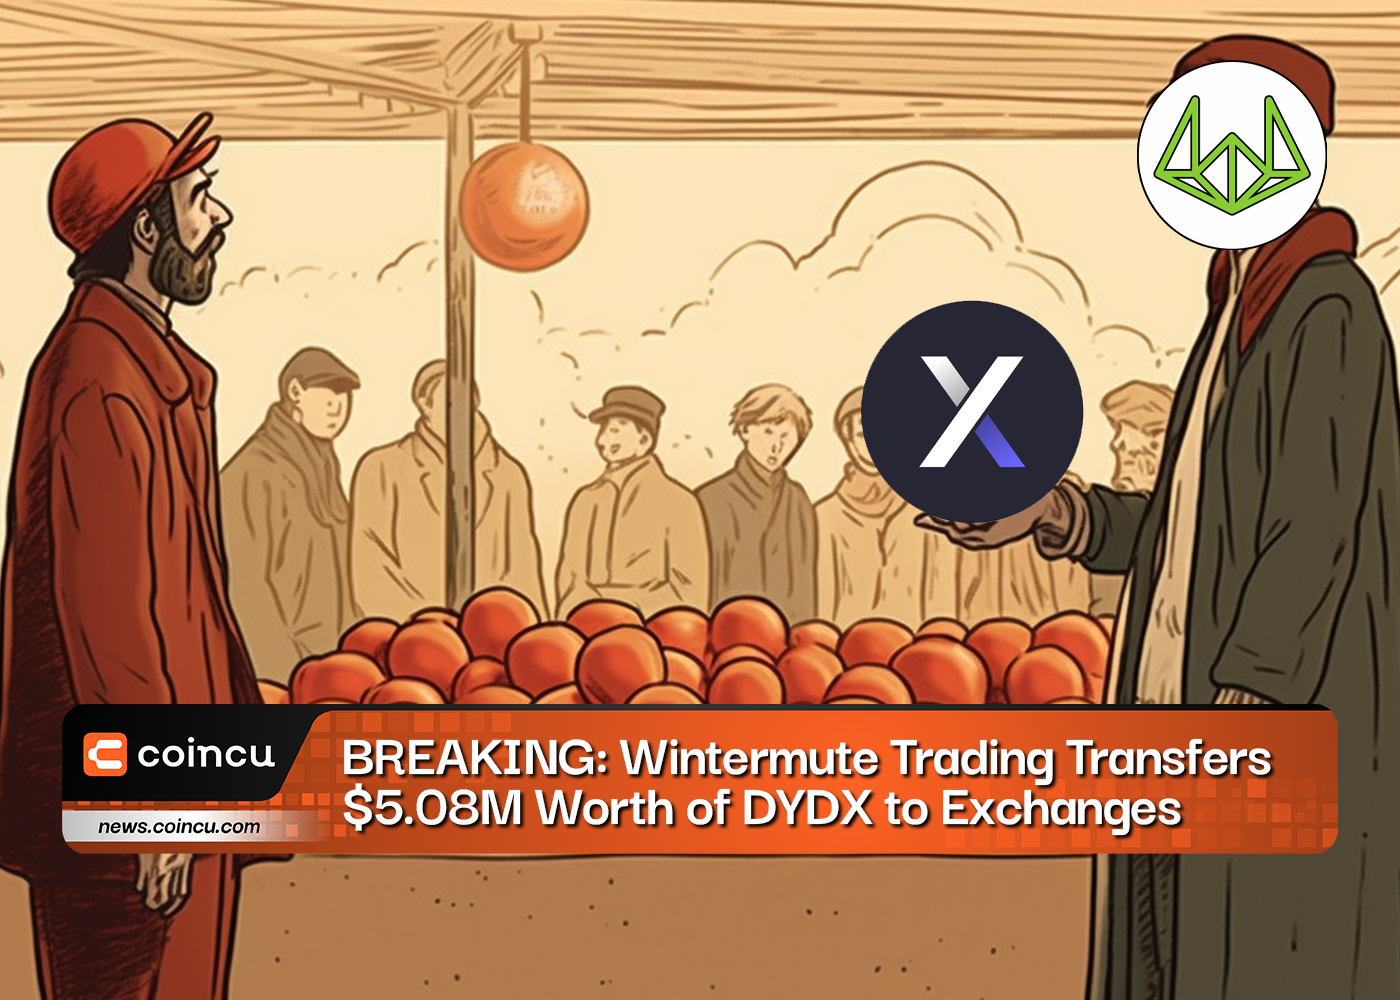 BREAKING Wintermute Trading Transfers 5.08M Worth of DYDX to